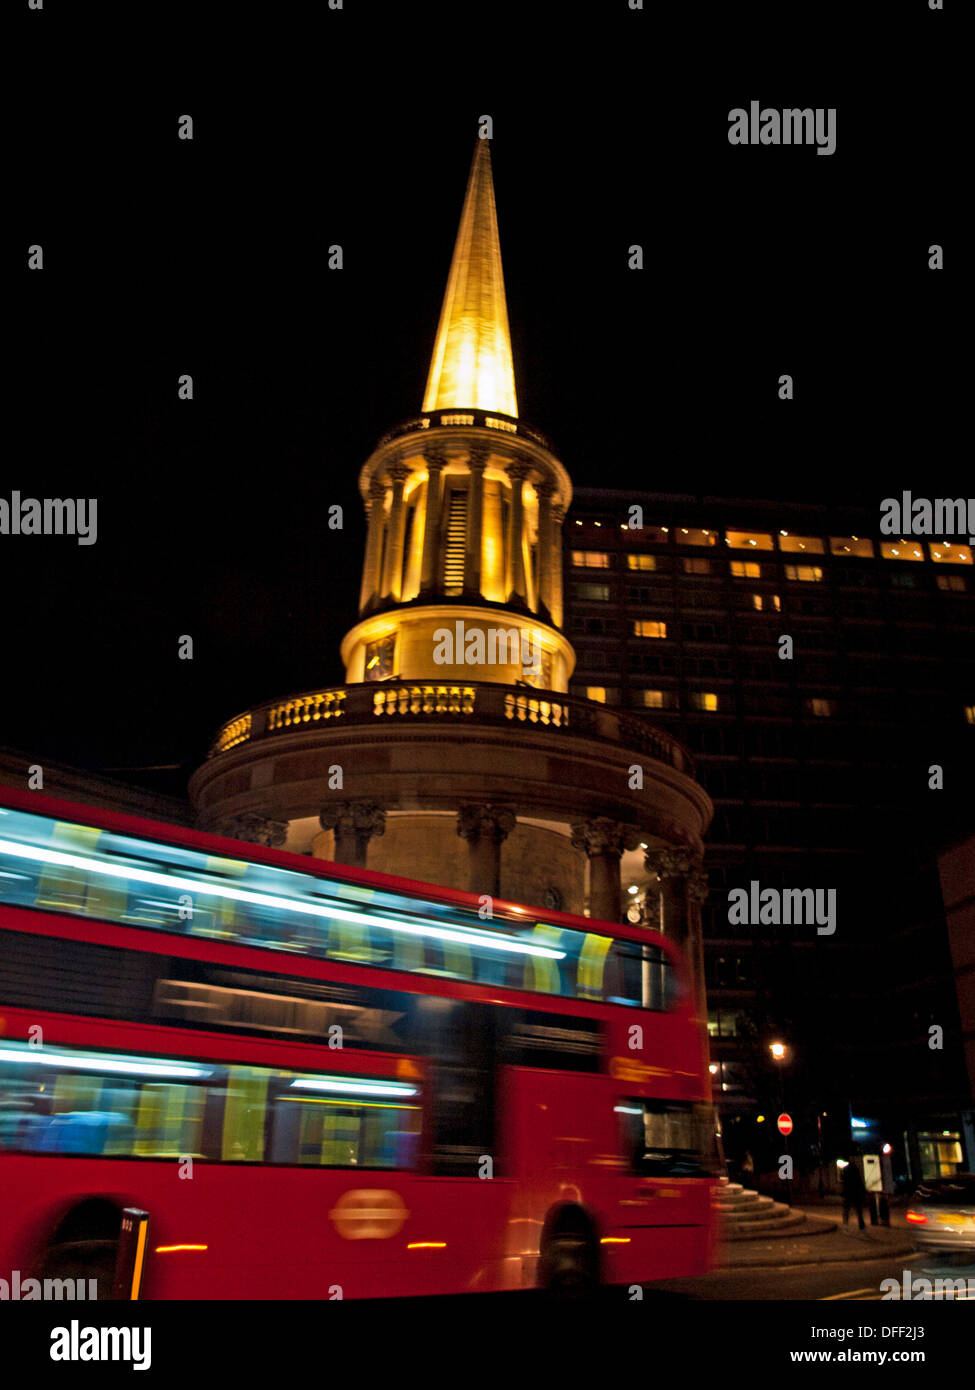 Double-decker bus in front of All Souls Church at night, Langham Place, London, England, United Kingdom Stock Photo